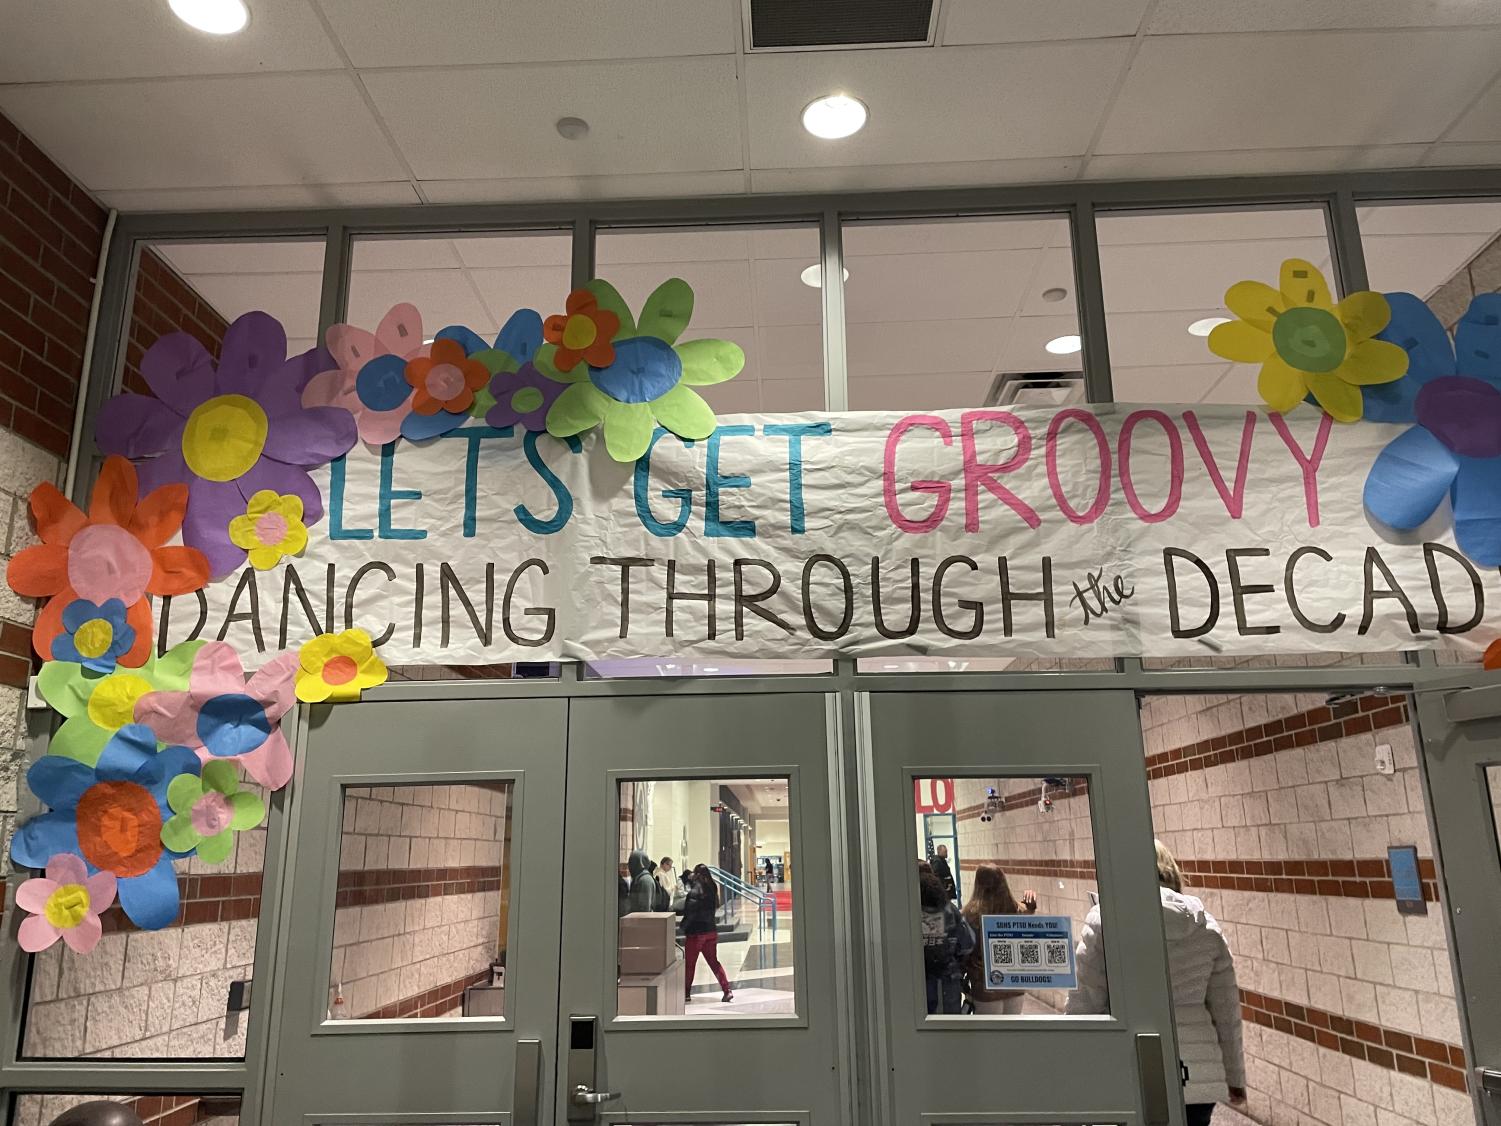 Homecoming 2022: “Dancing Through the Decades”